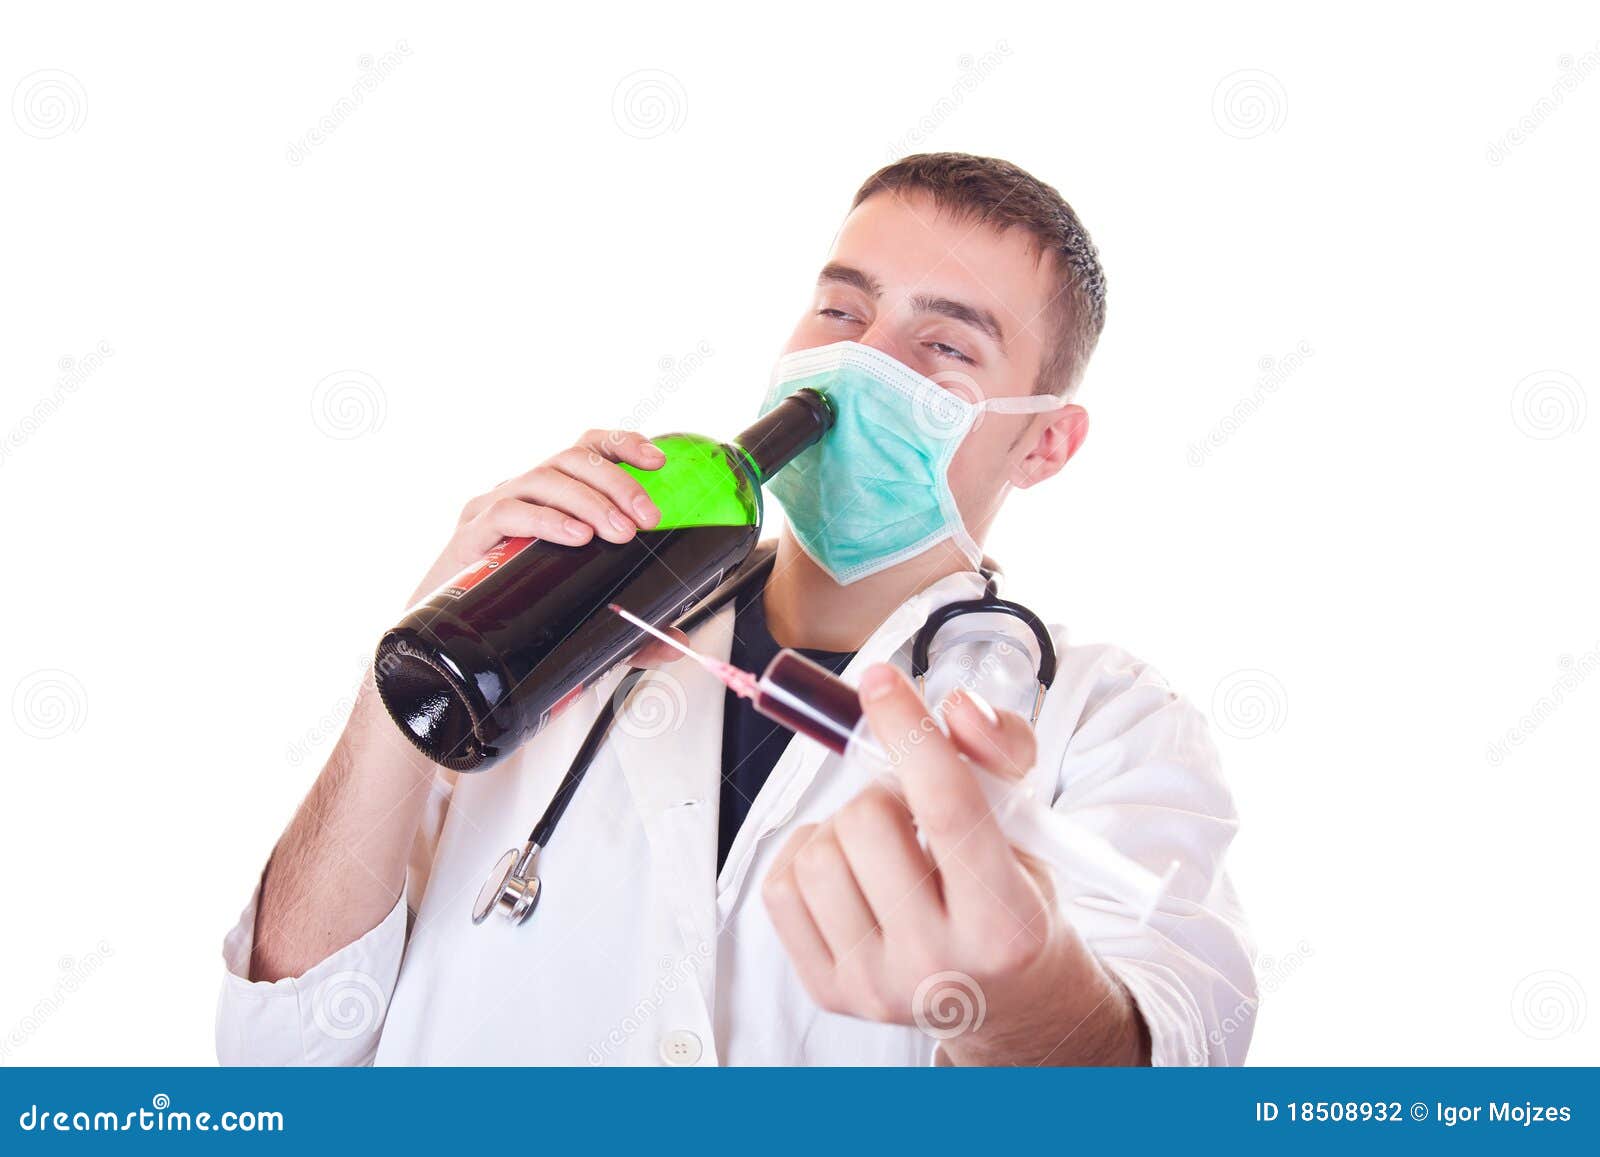 drunk-doctor-gives-therapy-stock-photo-image-18508932